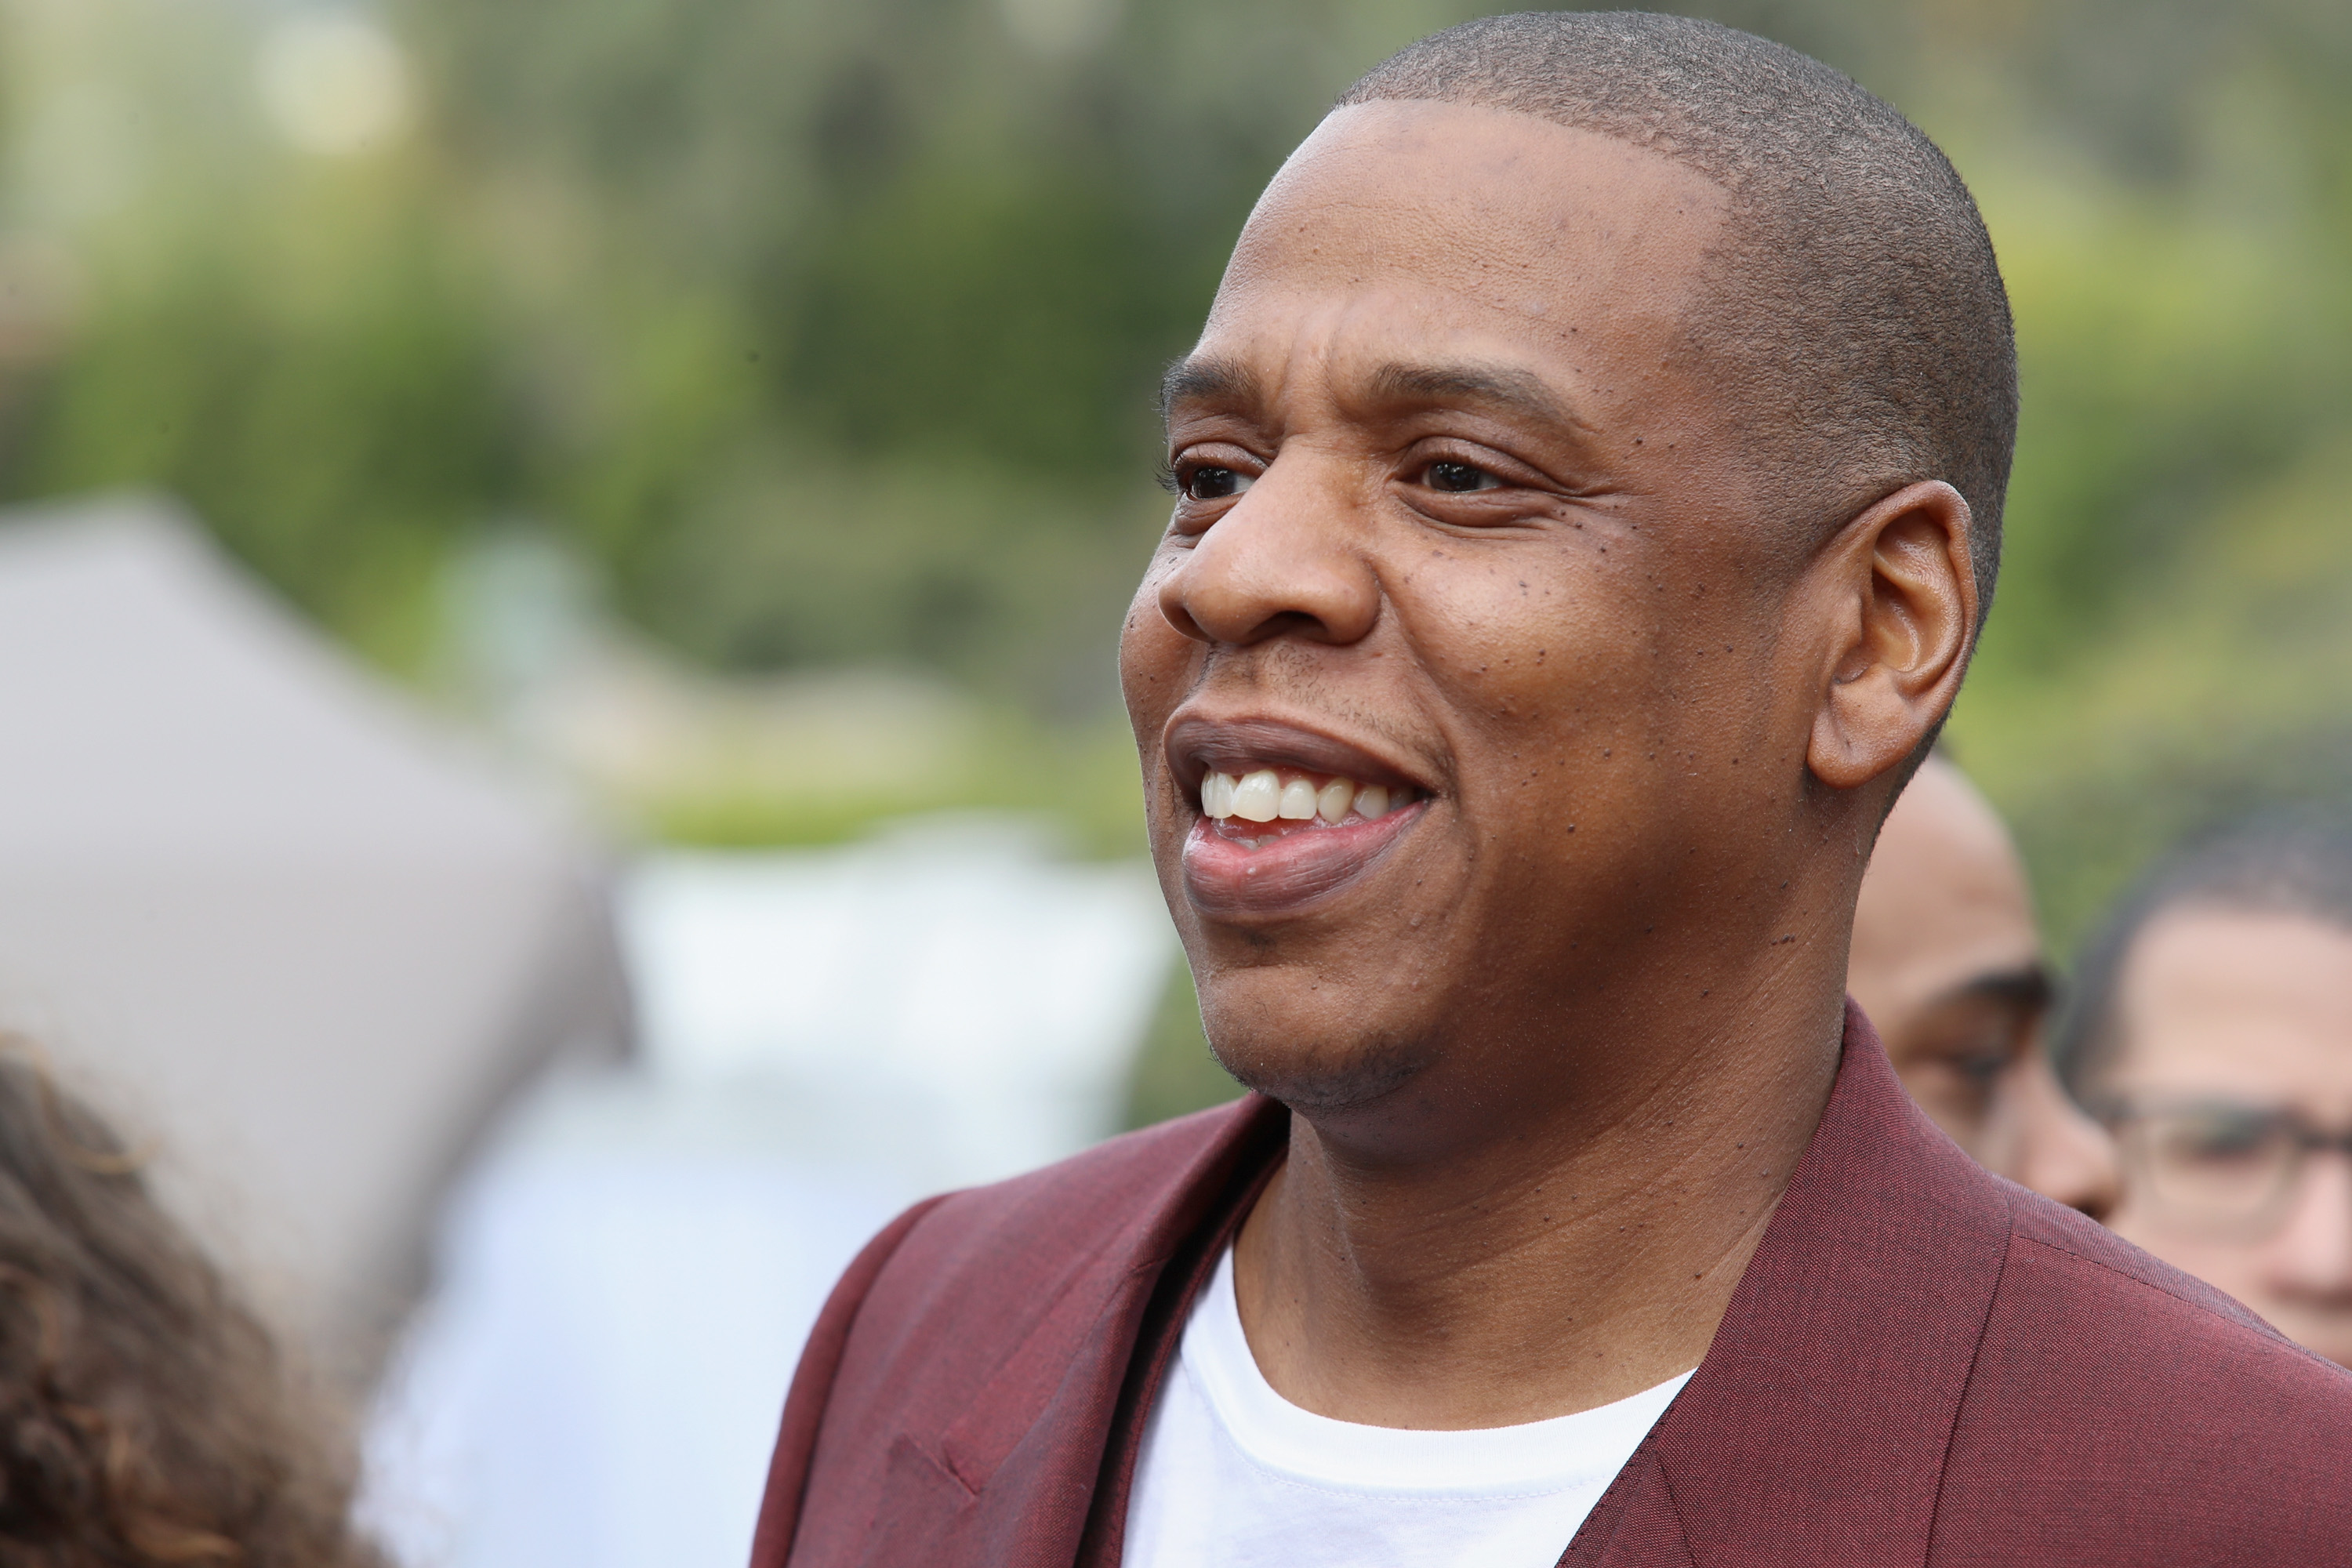 Jay-Z attends 2017 Roc Nation Pre-Grammy Brunch at Owlwood Estate on February 11, 2017 in Los Angeles, California. (Ari Perilstein—Roc Nation/Getty Images)